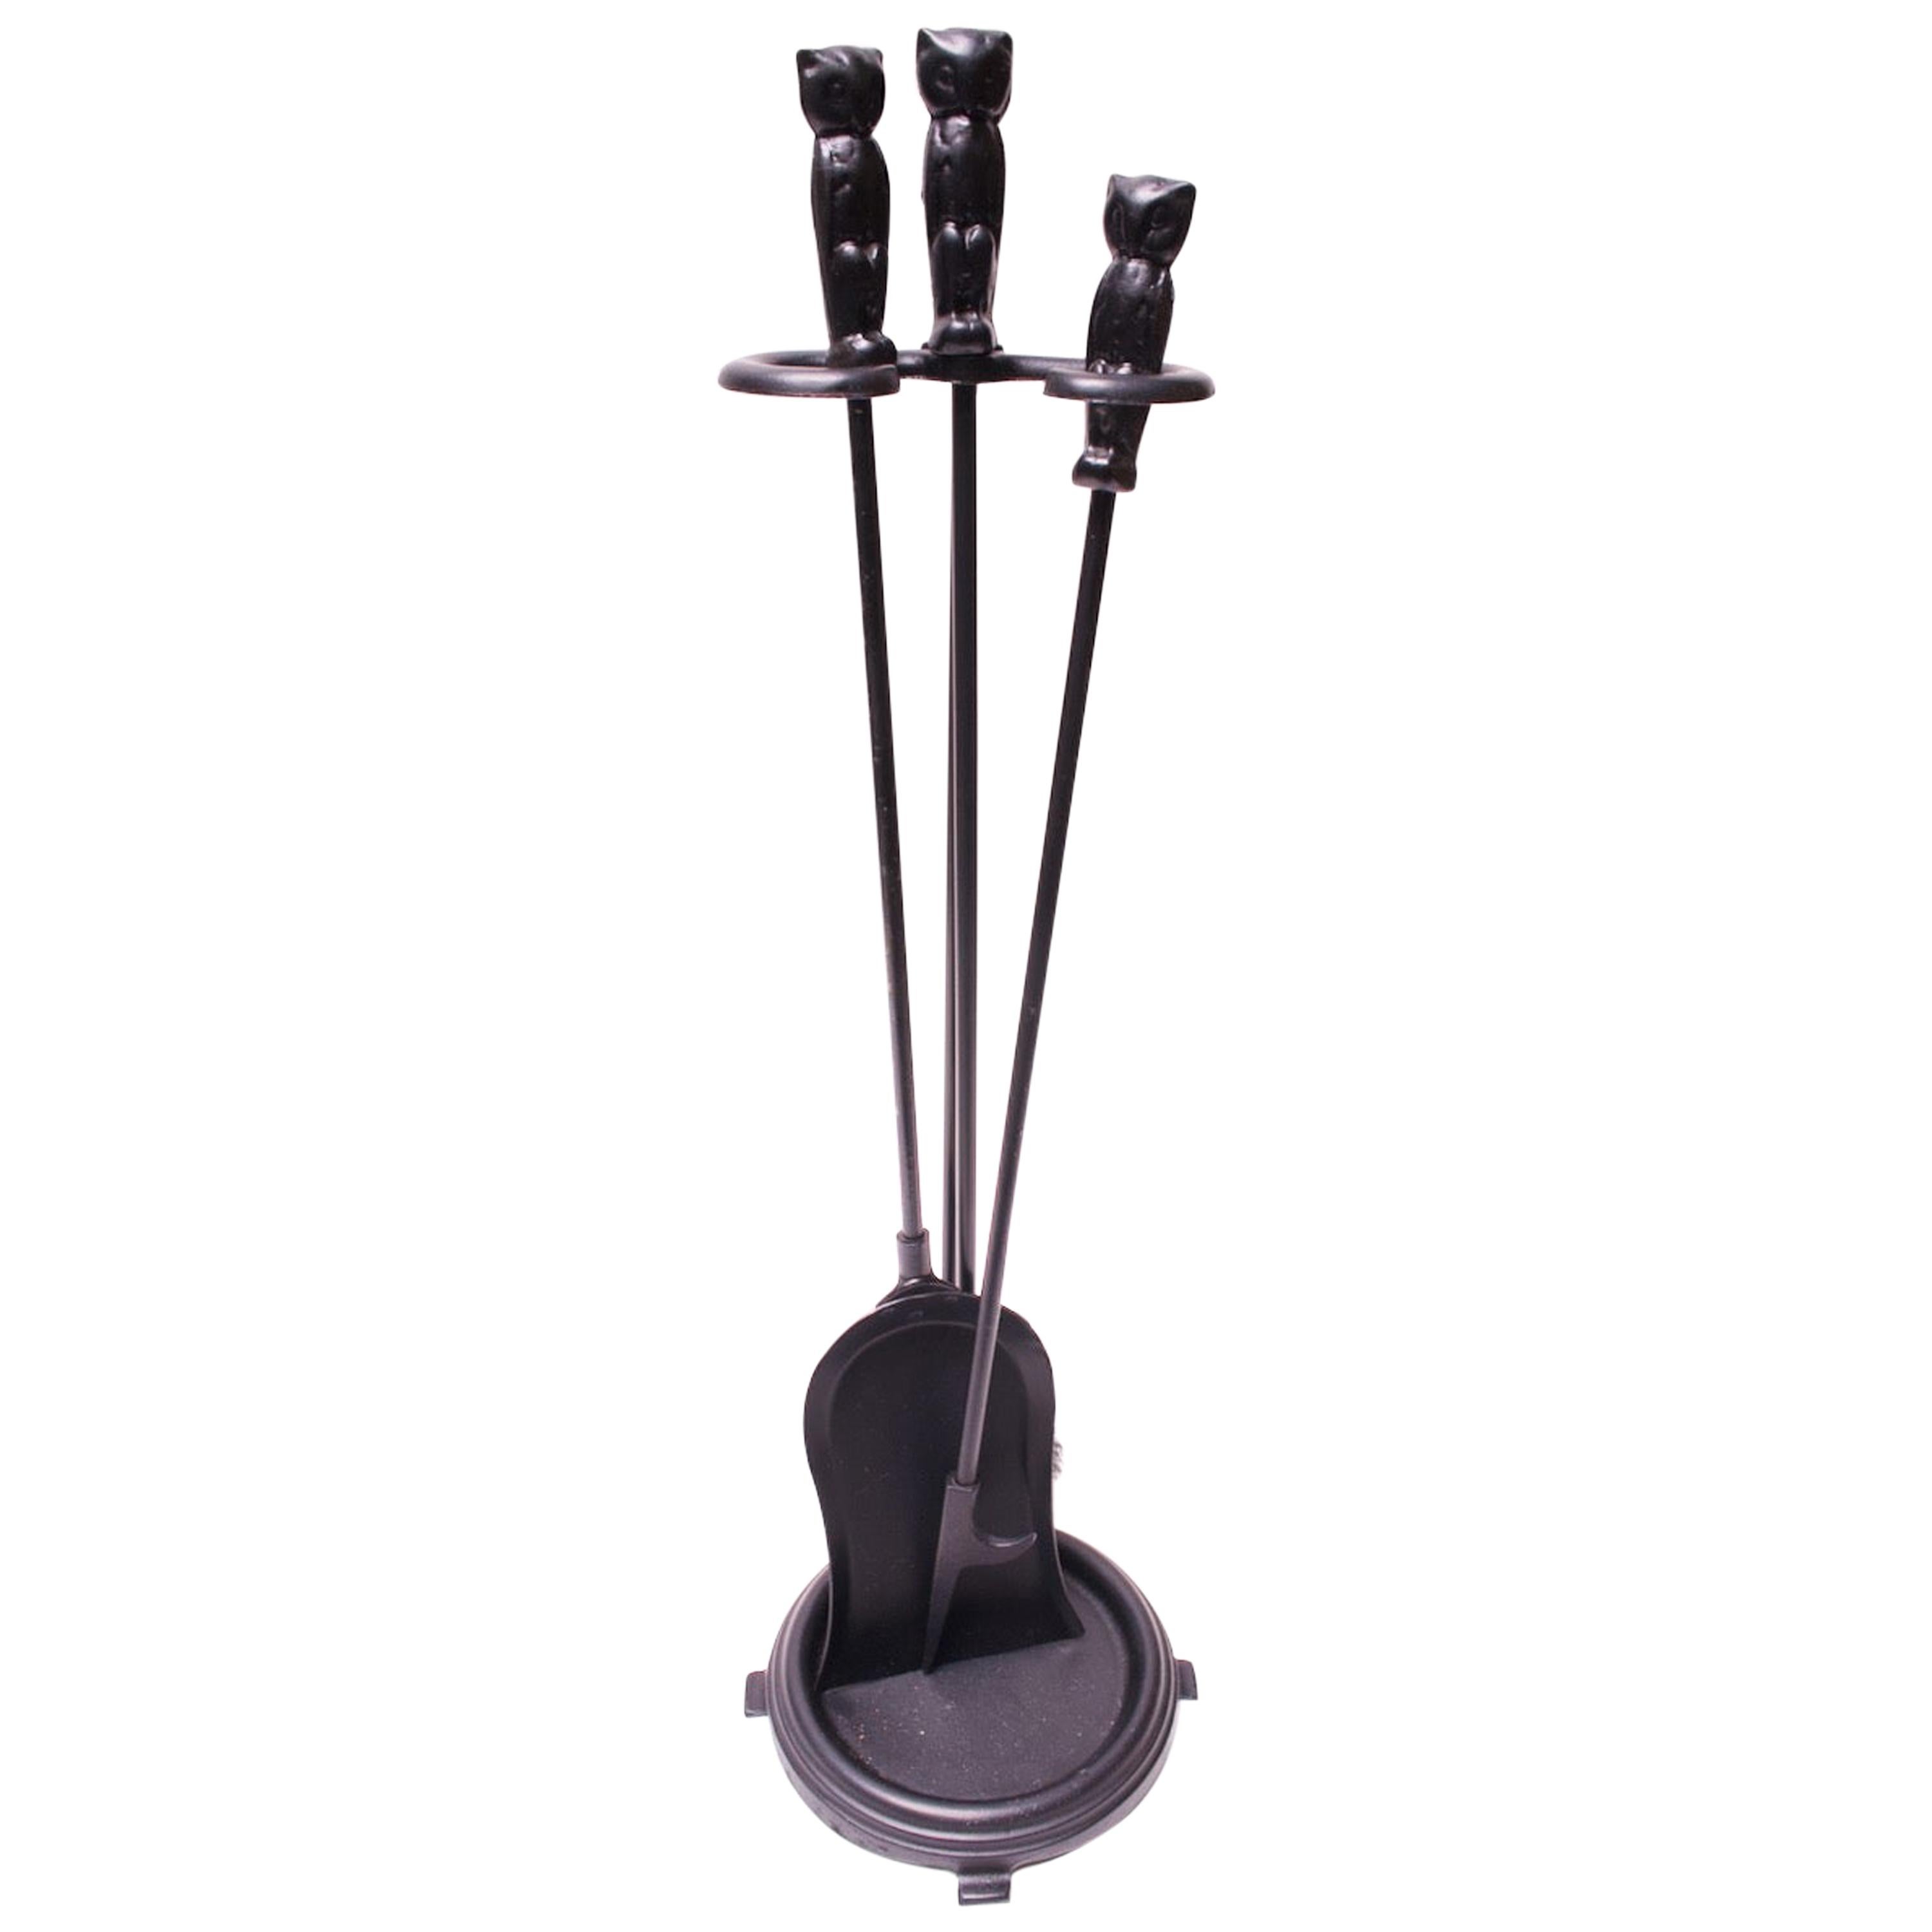 Cast iron fireplace tools forged by Hart Foundry of Massachusetts, circa 1920s. Features a Stand, brush, poker, and shovel, all decorated with an 